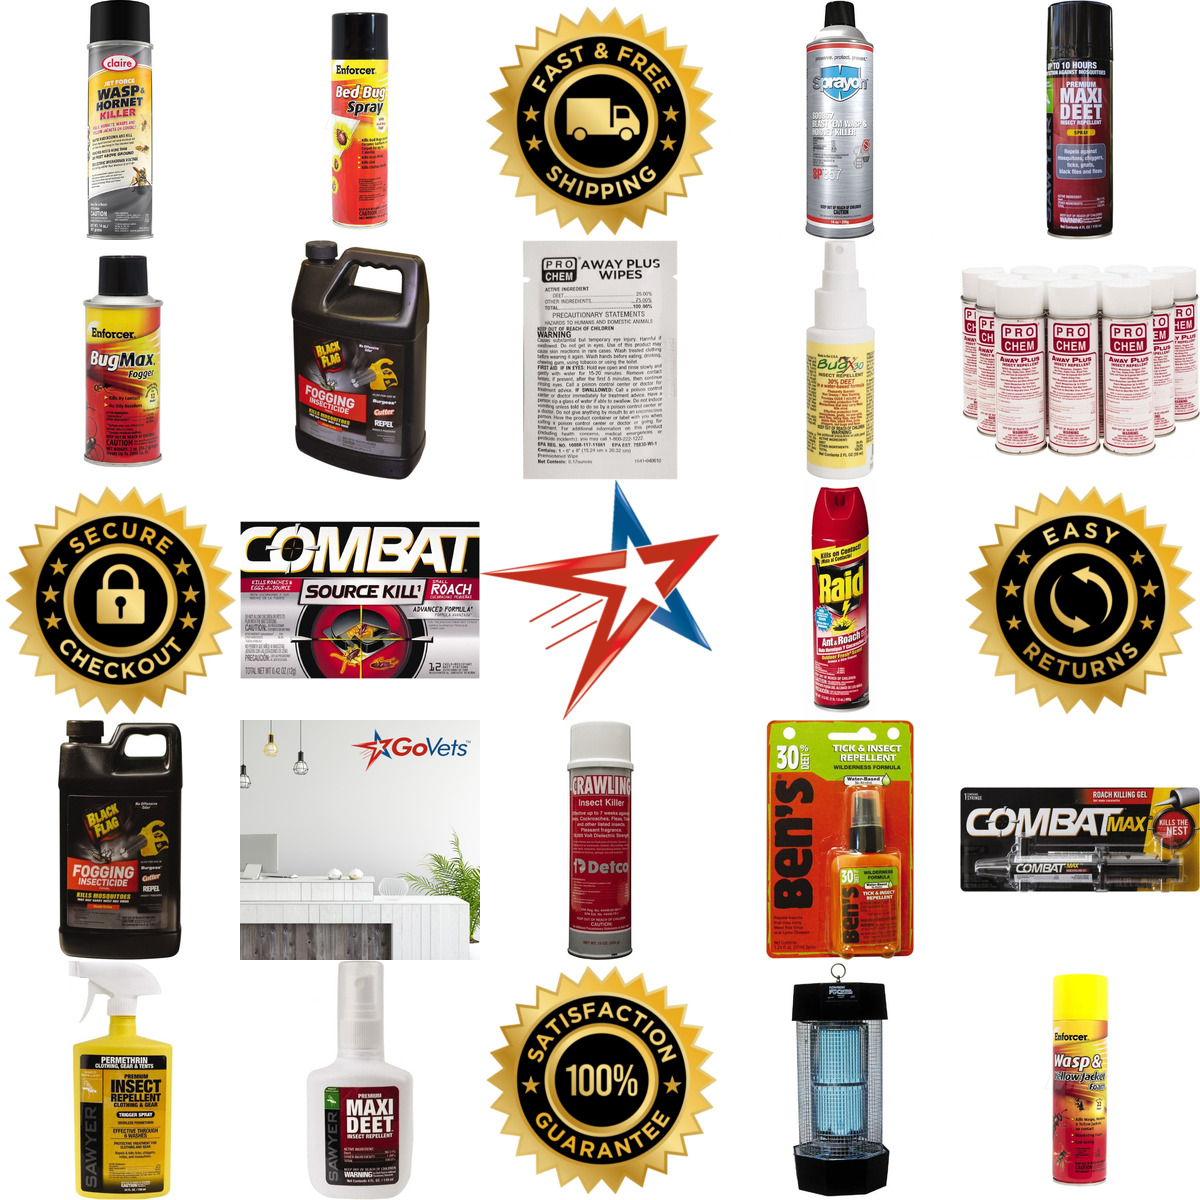 A selection of Insect Control products on GoVets